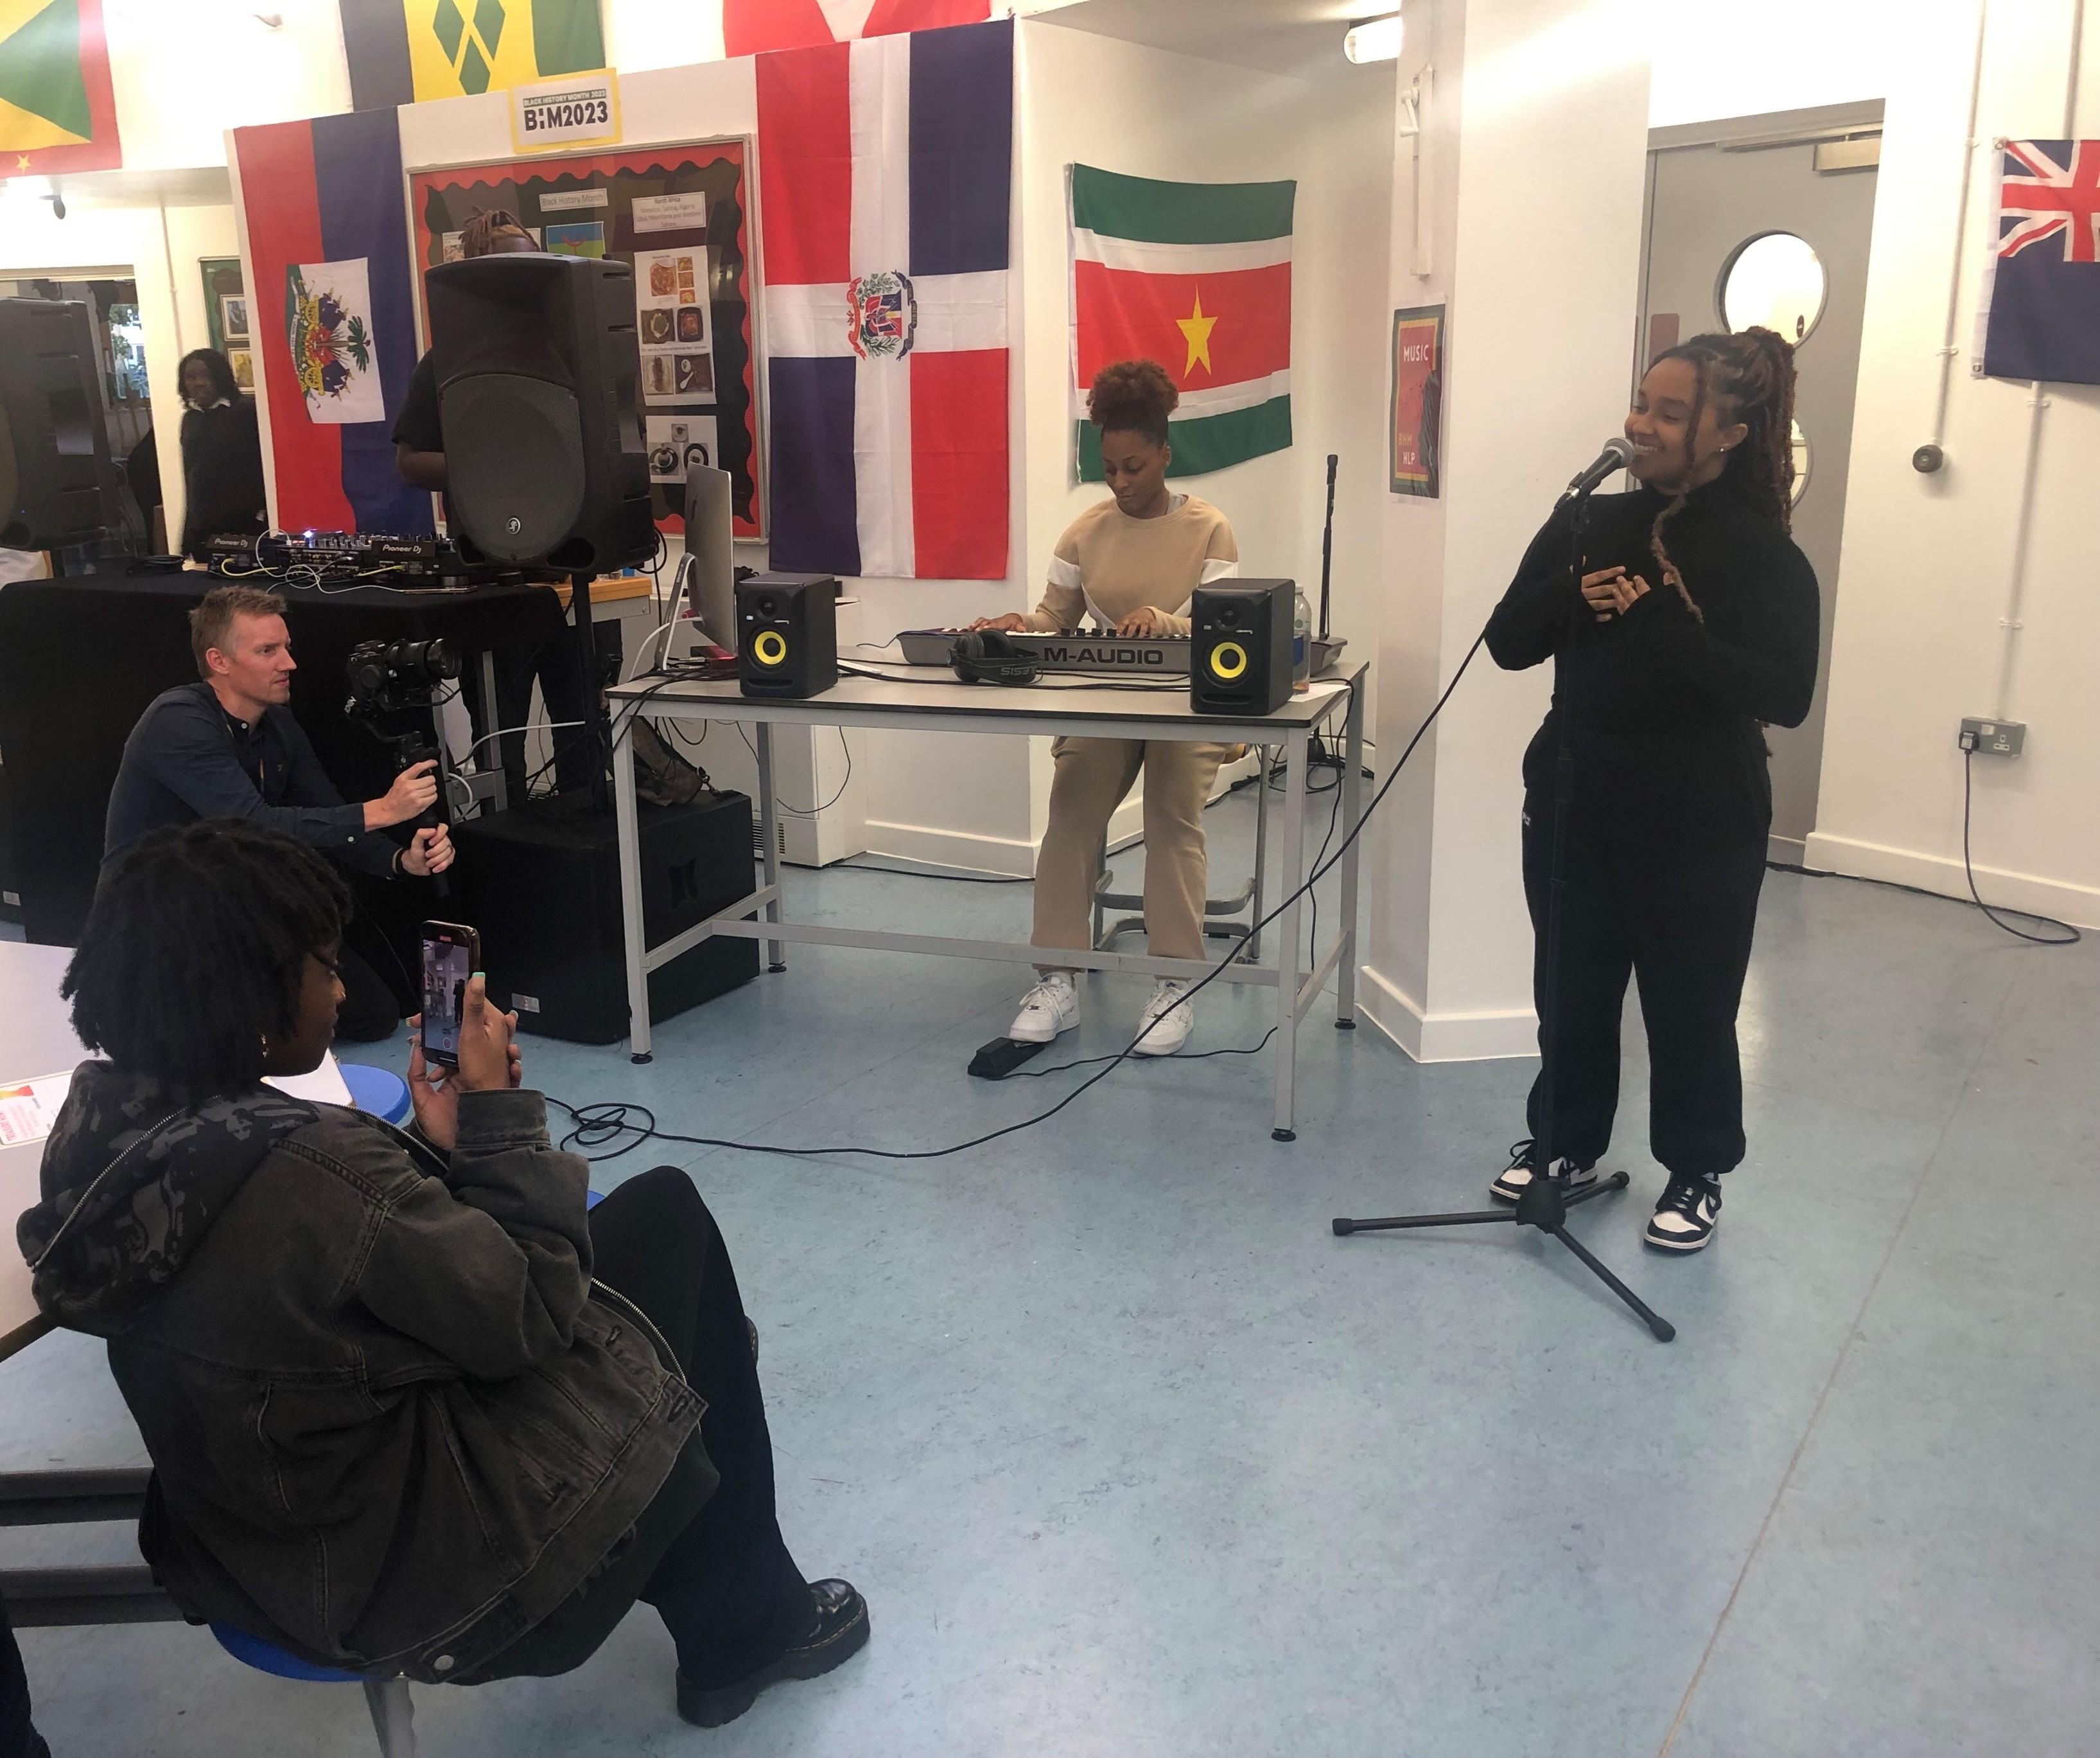 Black History Month event at Haringey Learning Partnership